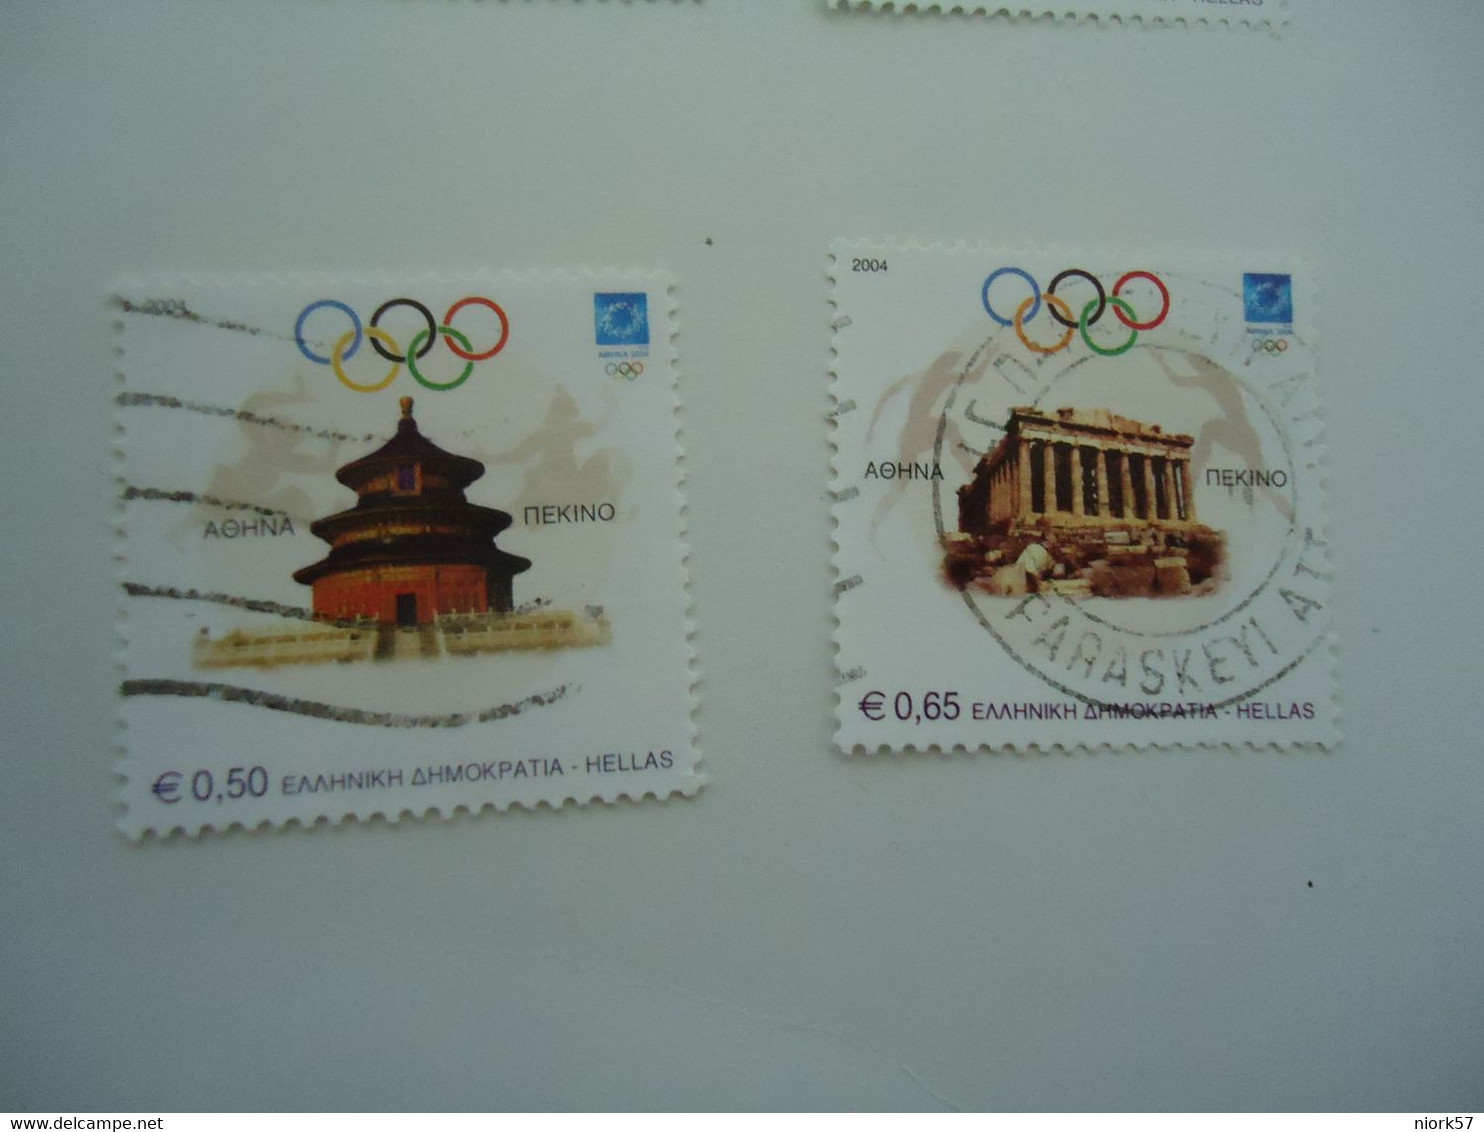 GREECE USED STAMPS SET 2 OLYMPIC GAMES 2004 ATHENS BEIGING - Eté 2004: Athènes - Paralympic